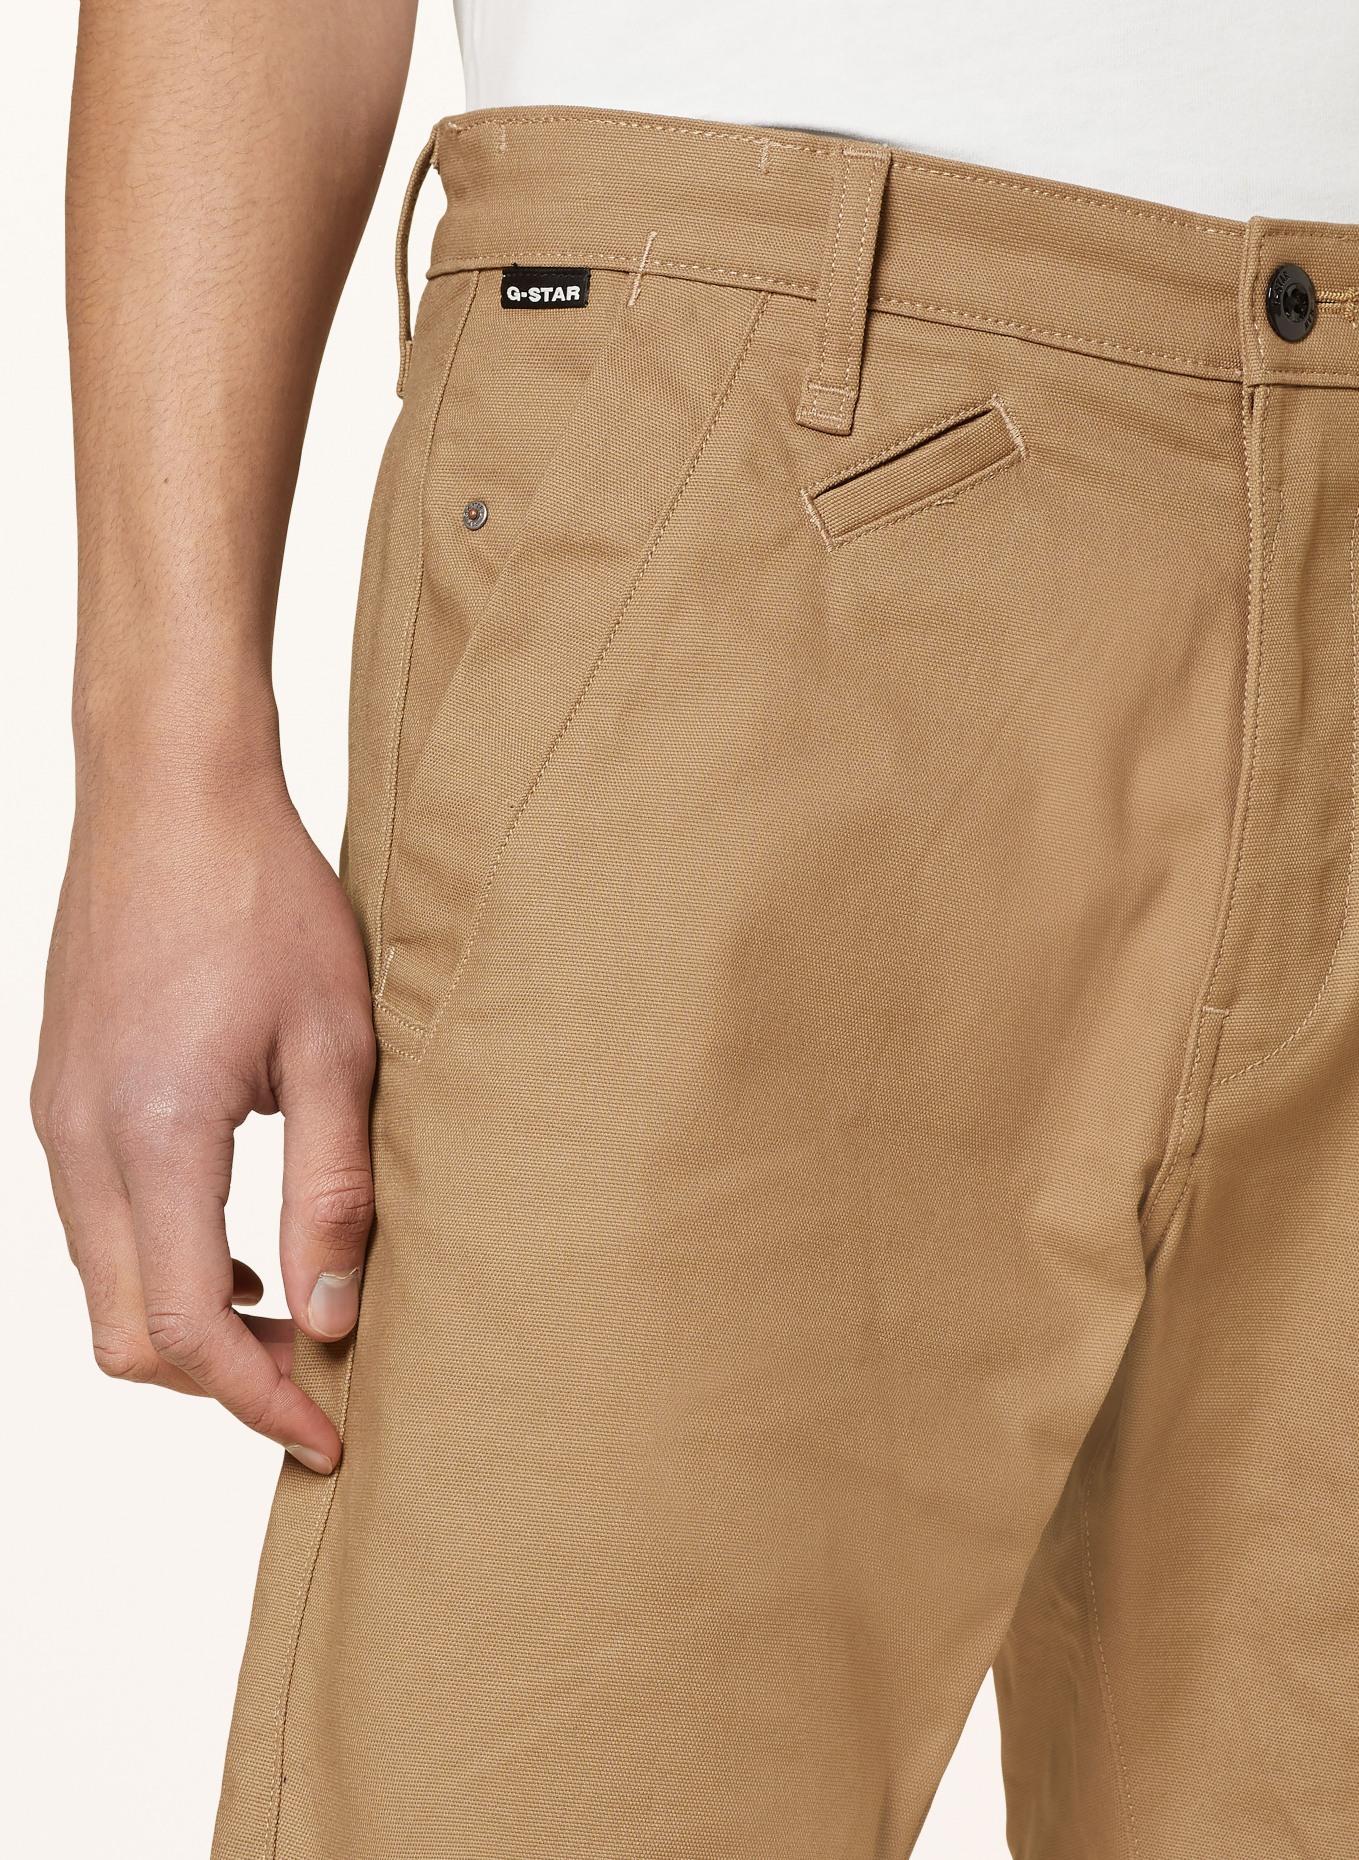 G-Star RAW Chino shorts BRONSON, Color: BEIGE (Image 5)